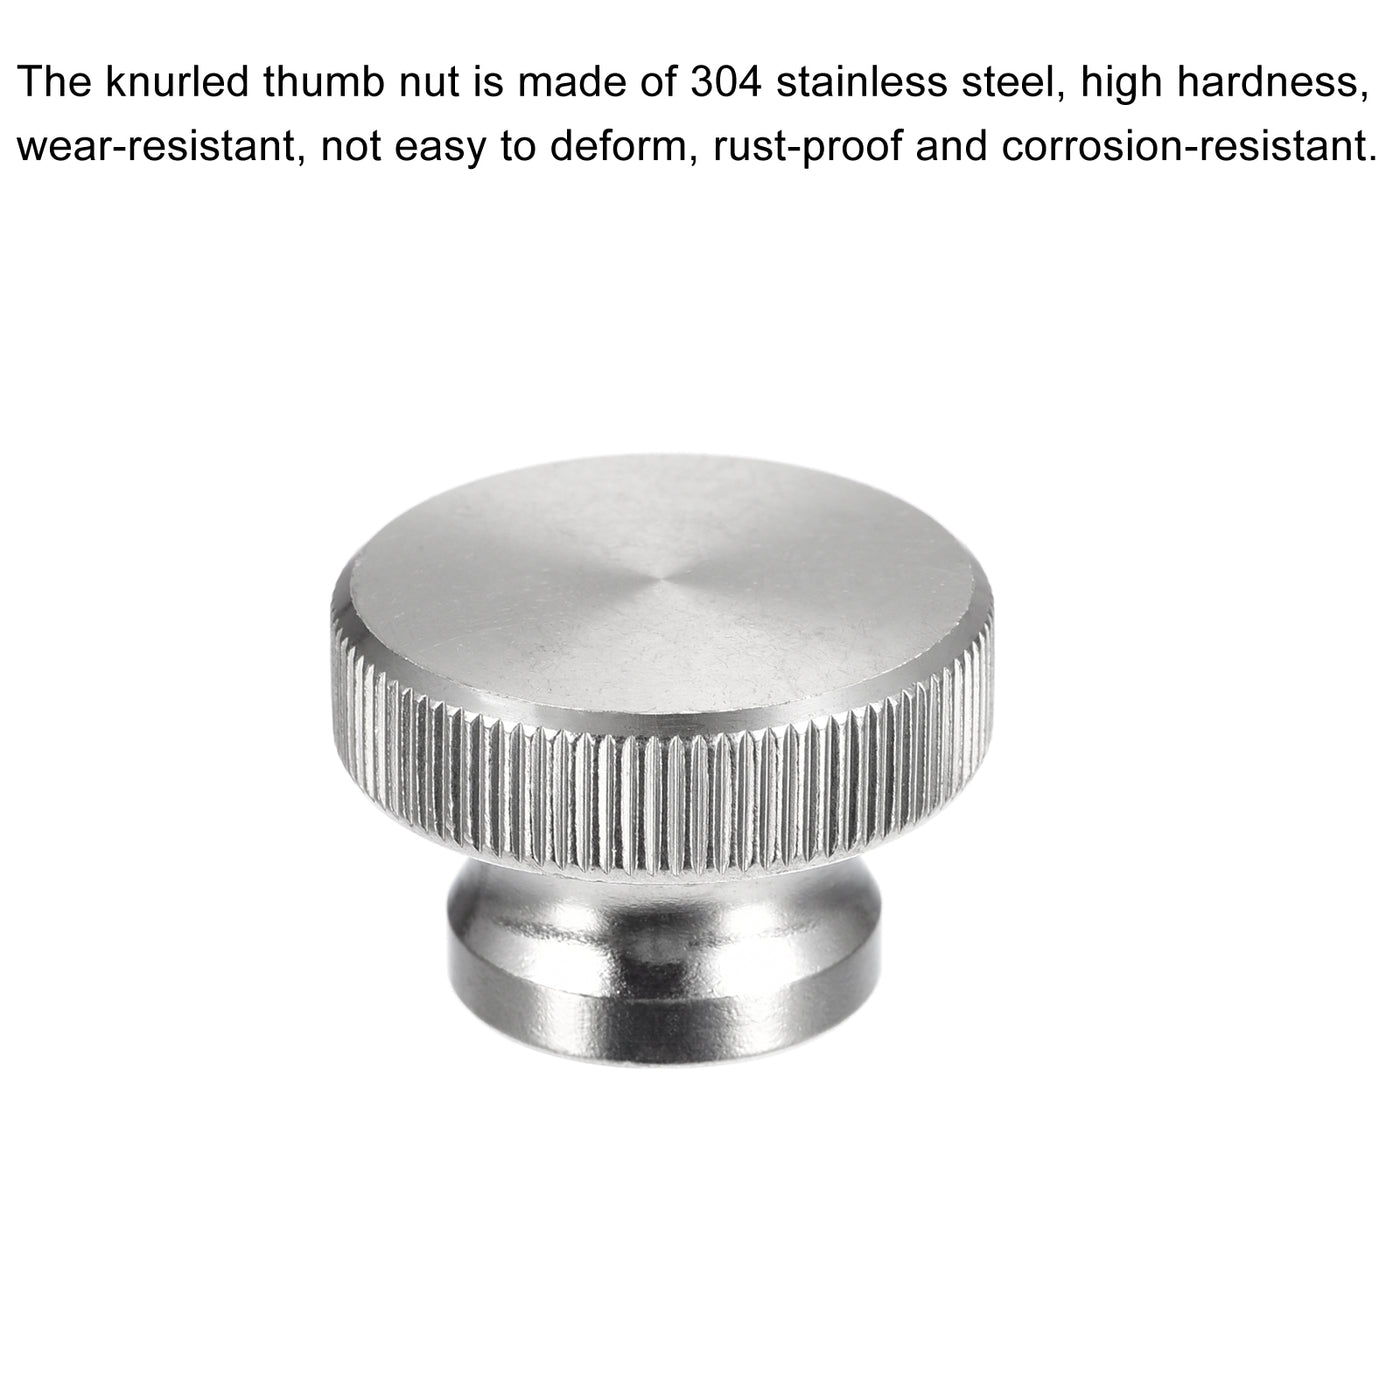 uxcell Uxcell Knurled Thumb Nuts, 2pcs M10 x D30mm x H20mm 304 Stainless Steel Blind Hole Nuts